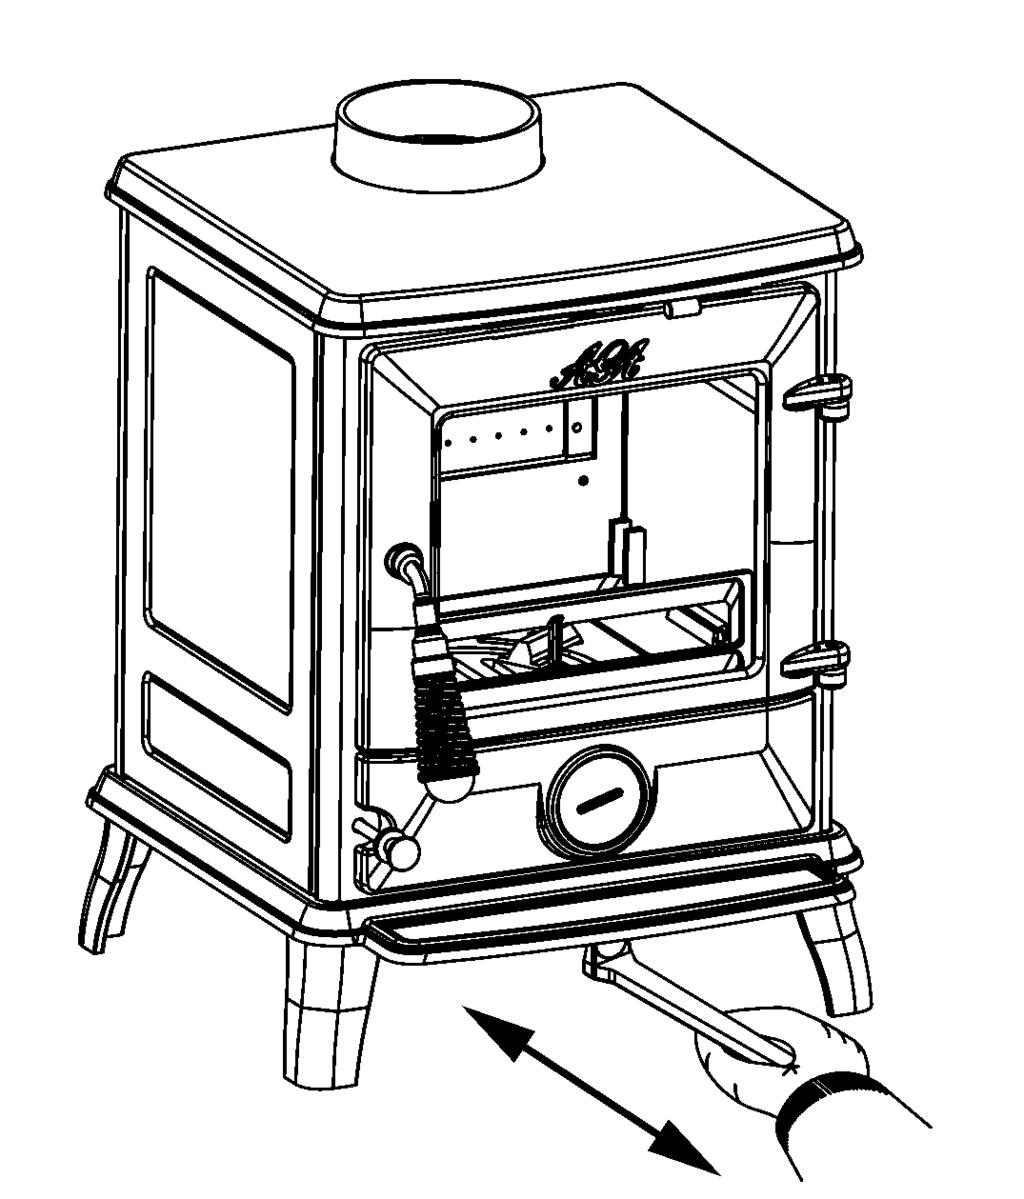 TERTIARY AIR CONTROL Fig.9 When burning wood pull out fully the control knob. This air control is a push pull operation, pull for fully open and push for fully closed.